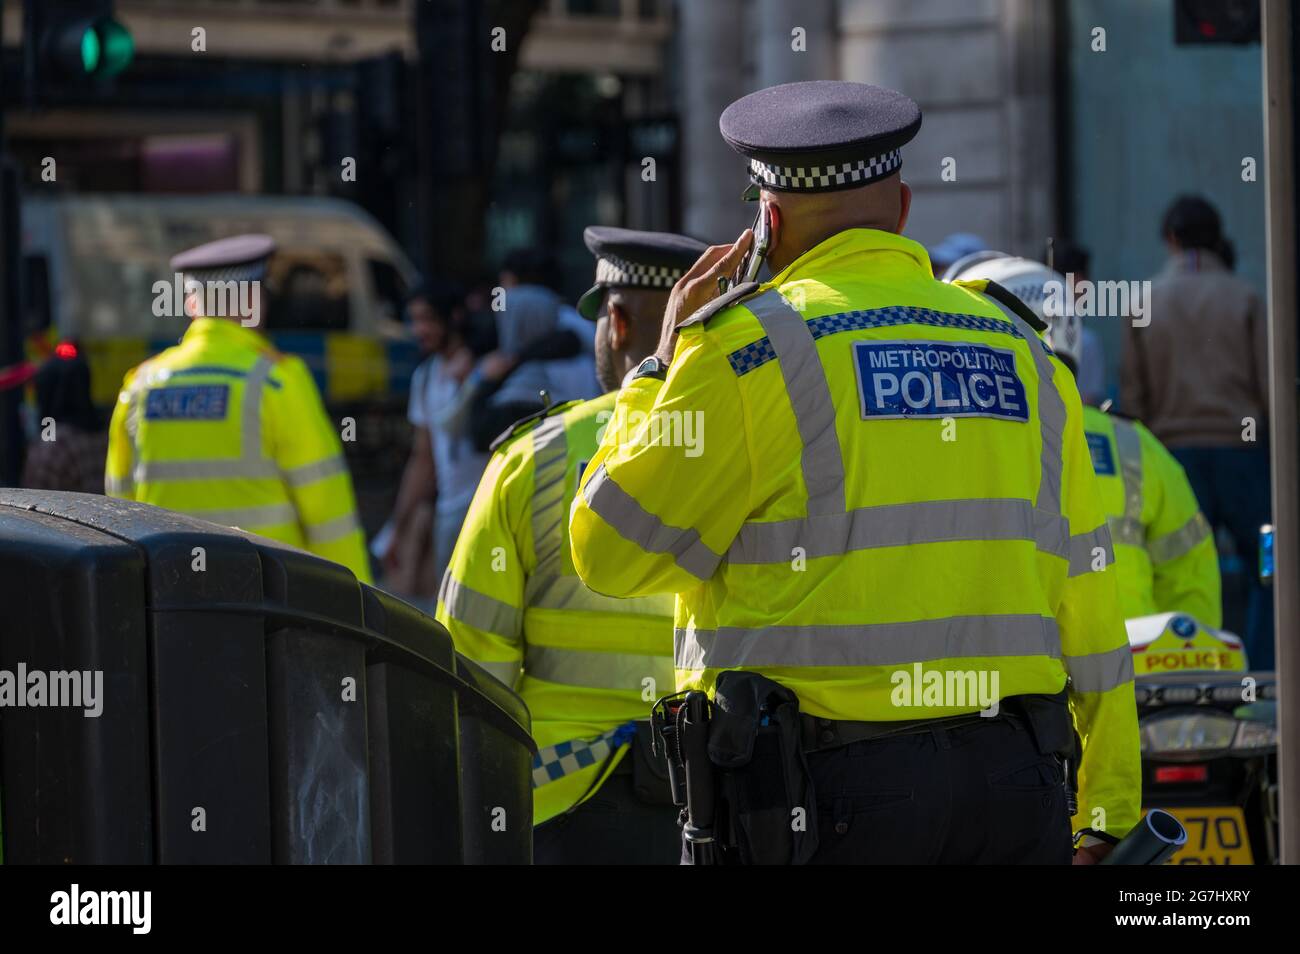 LONDON - MAY 29, 2021: British police officer in a high visibility jacket uses a mobile cell phone Stock Photo